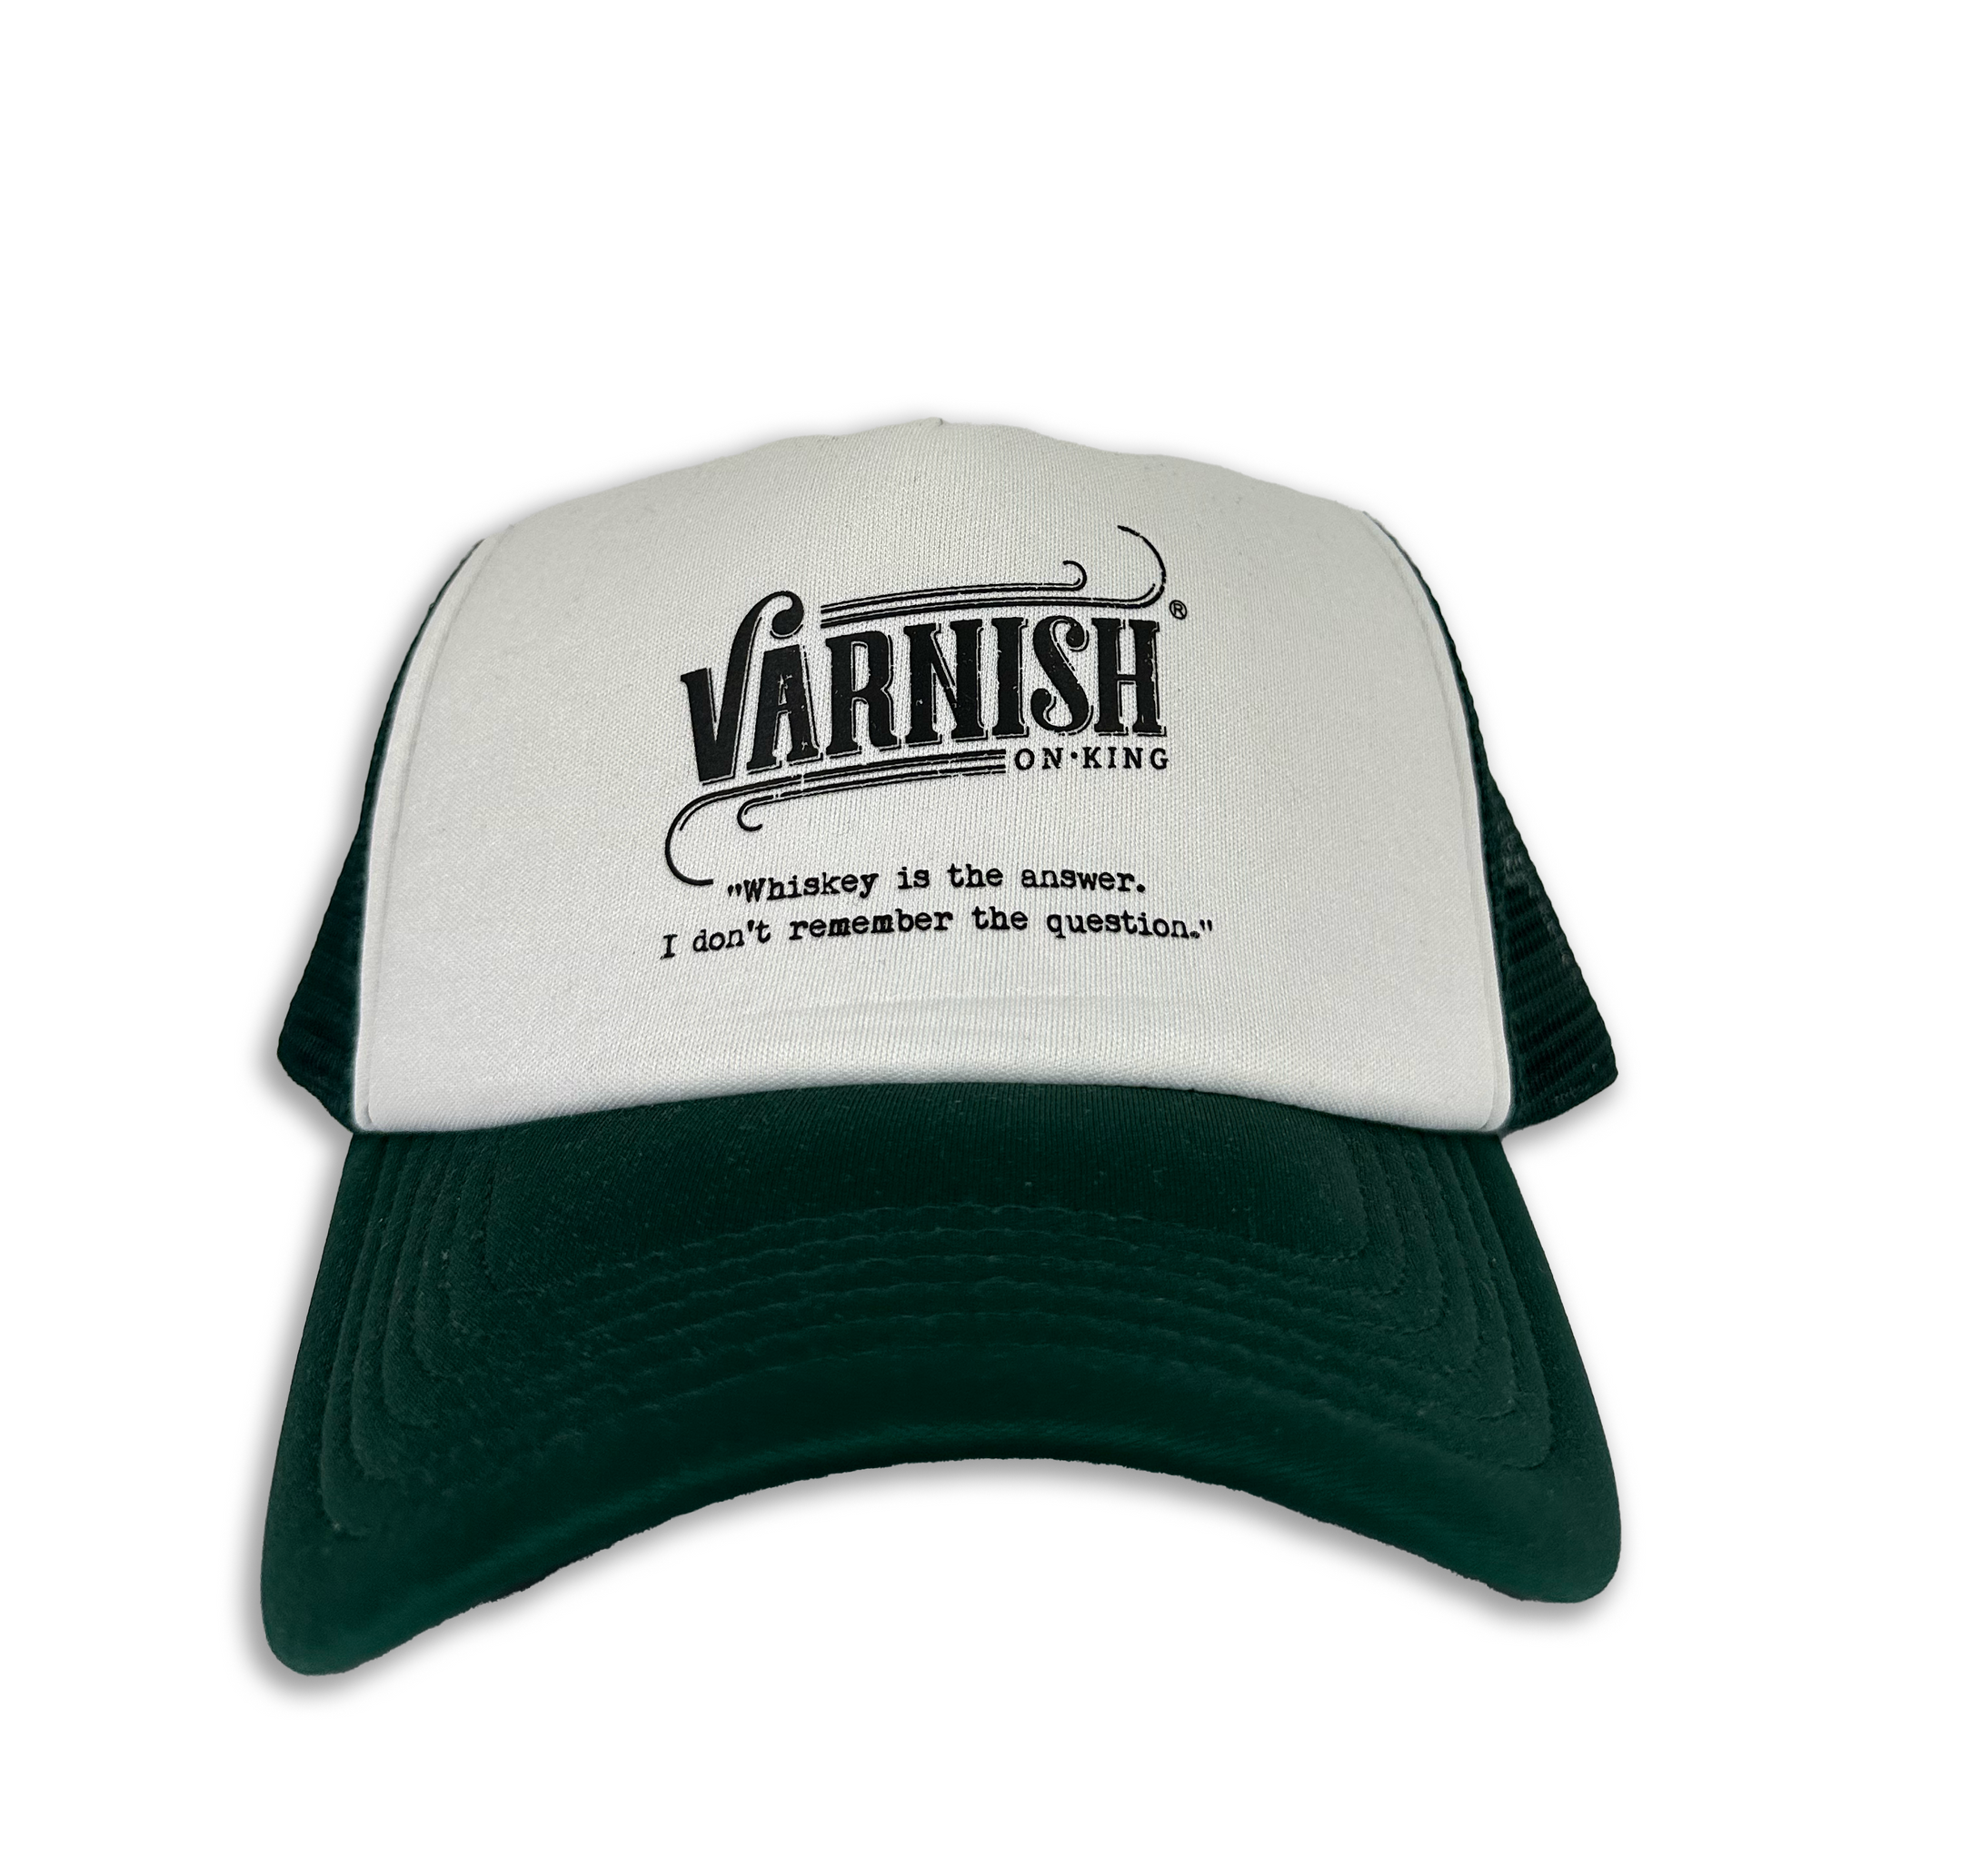 VARNISH LTD ED 'WHISKEY IS THE ANSWER. I DON'T REMEMBER THE QUESTION.' TRUCKER